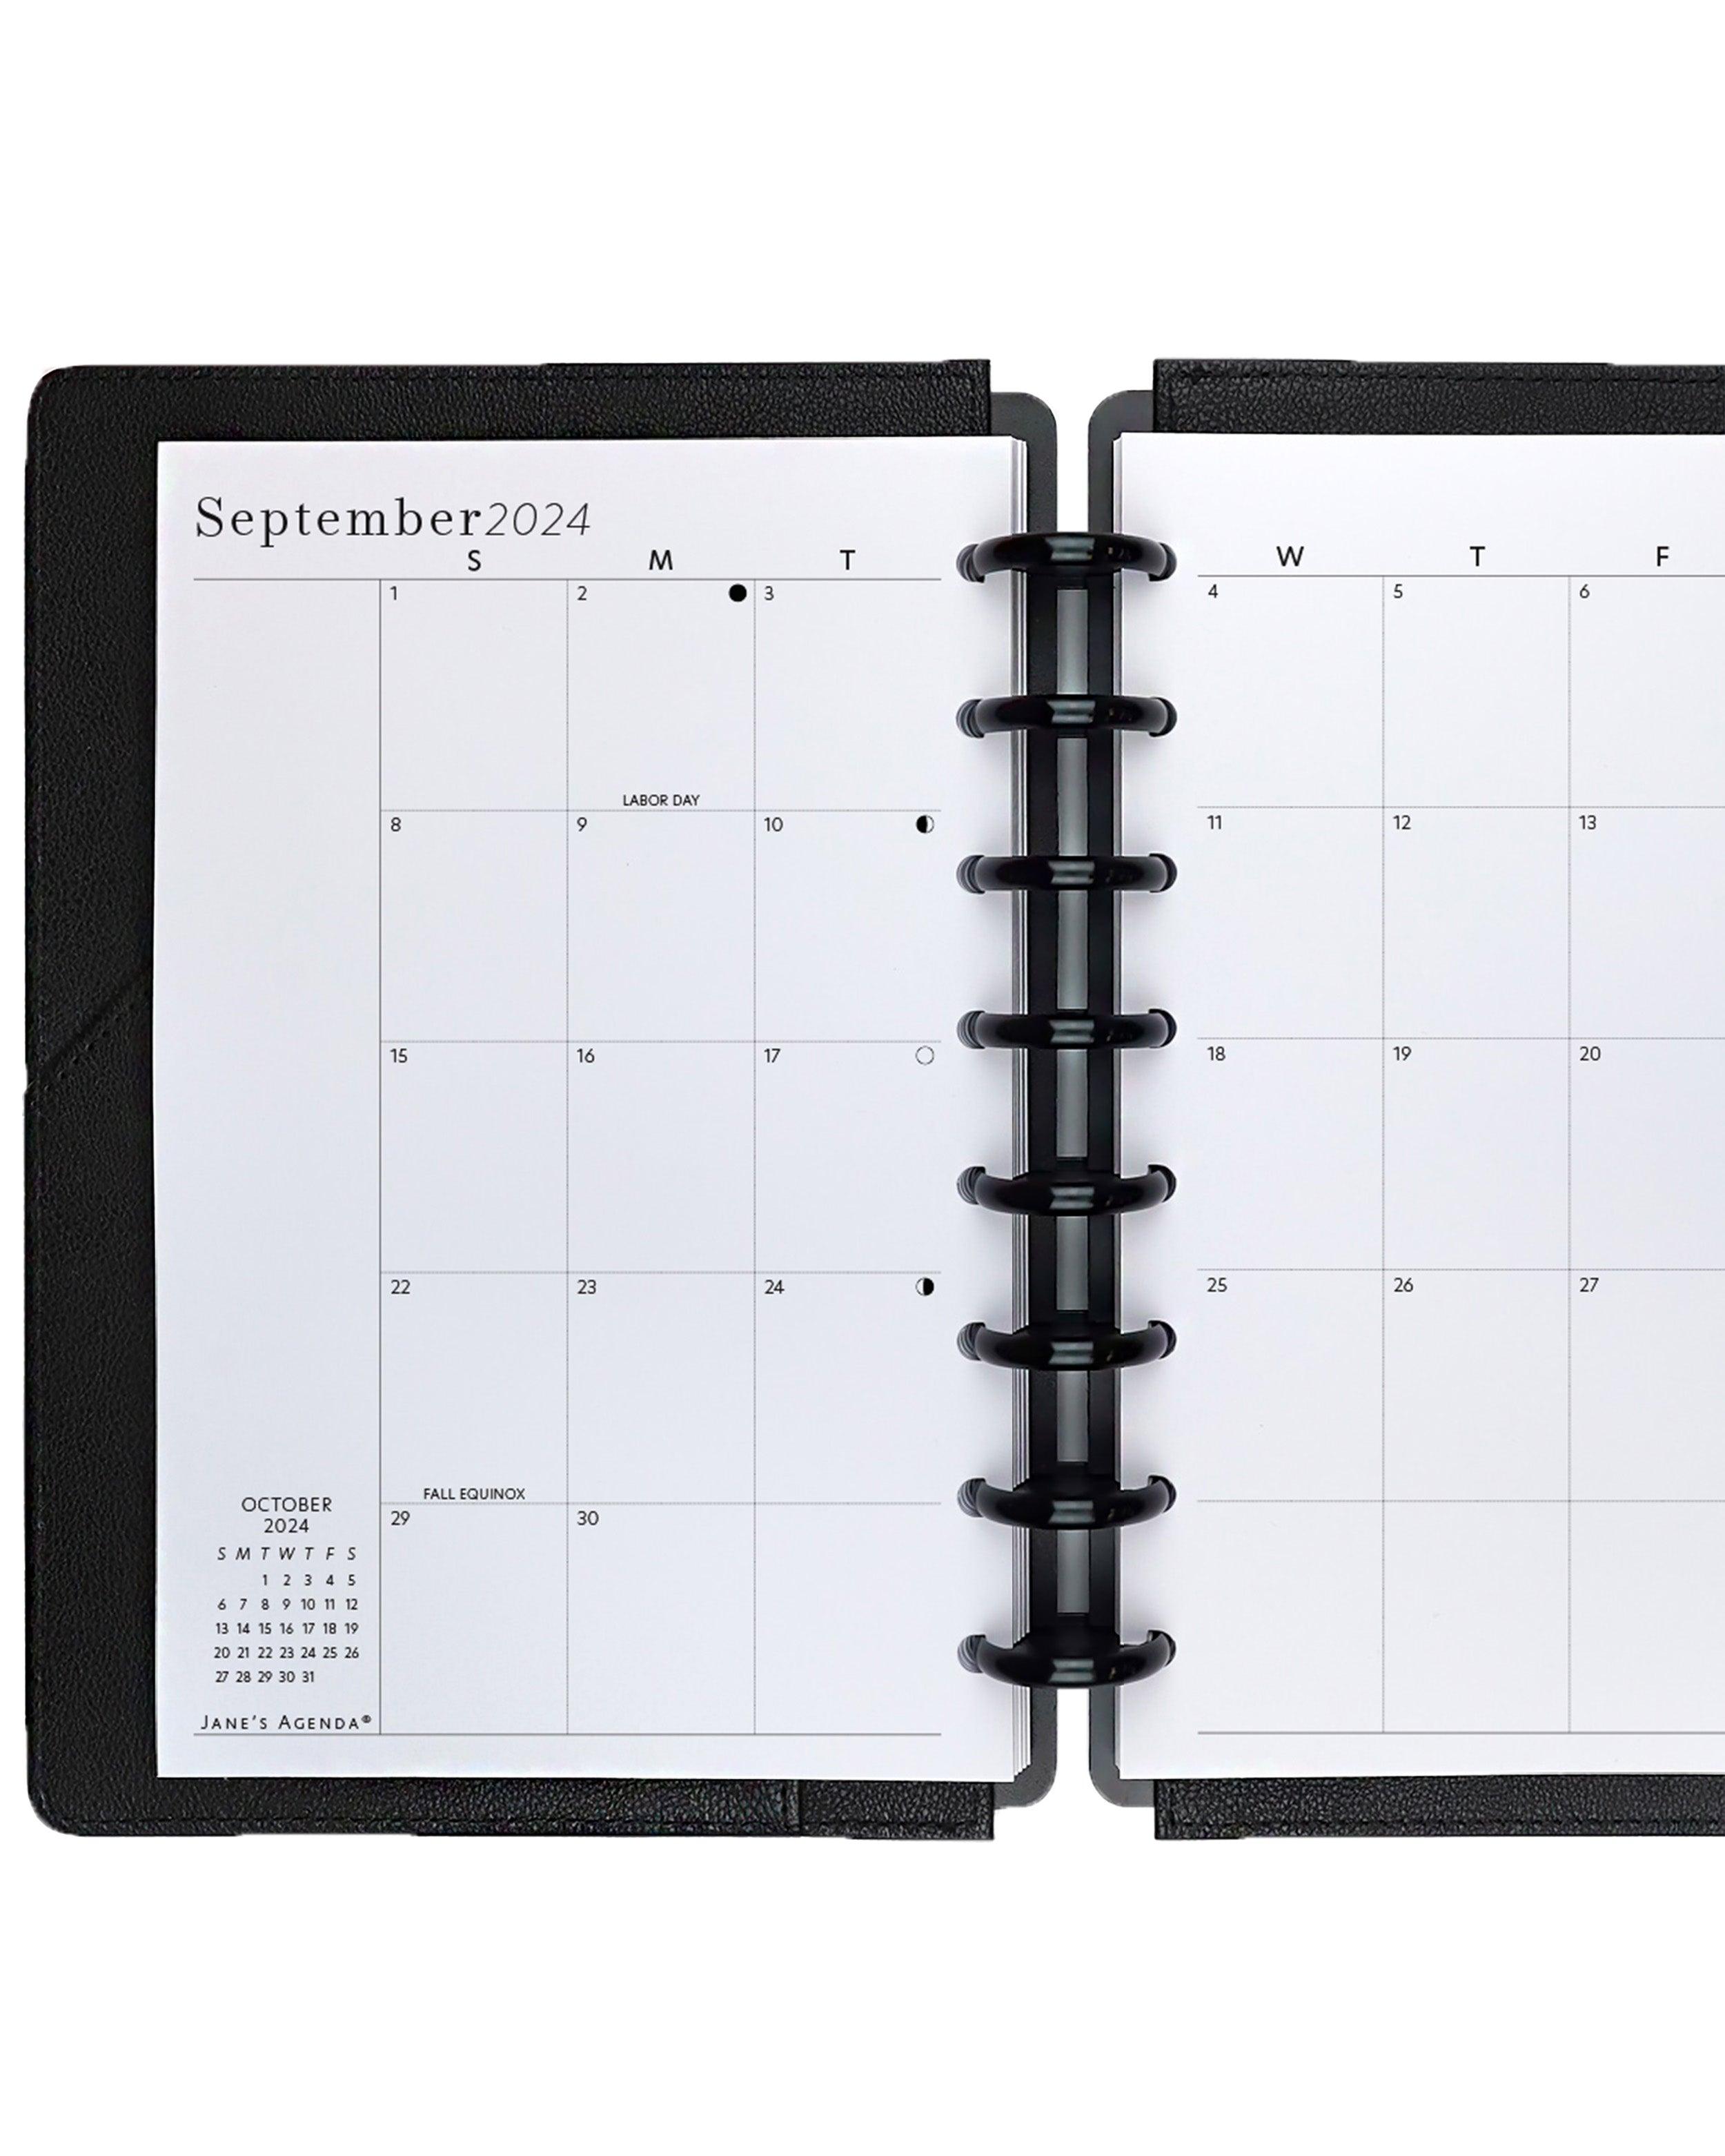 Monthly Planner Inserts refill calendar pages by Janes Agenda for discbound and six ring planner systems.